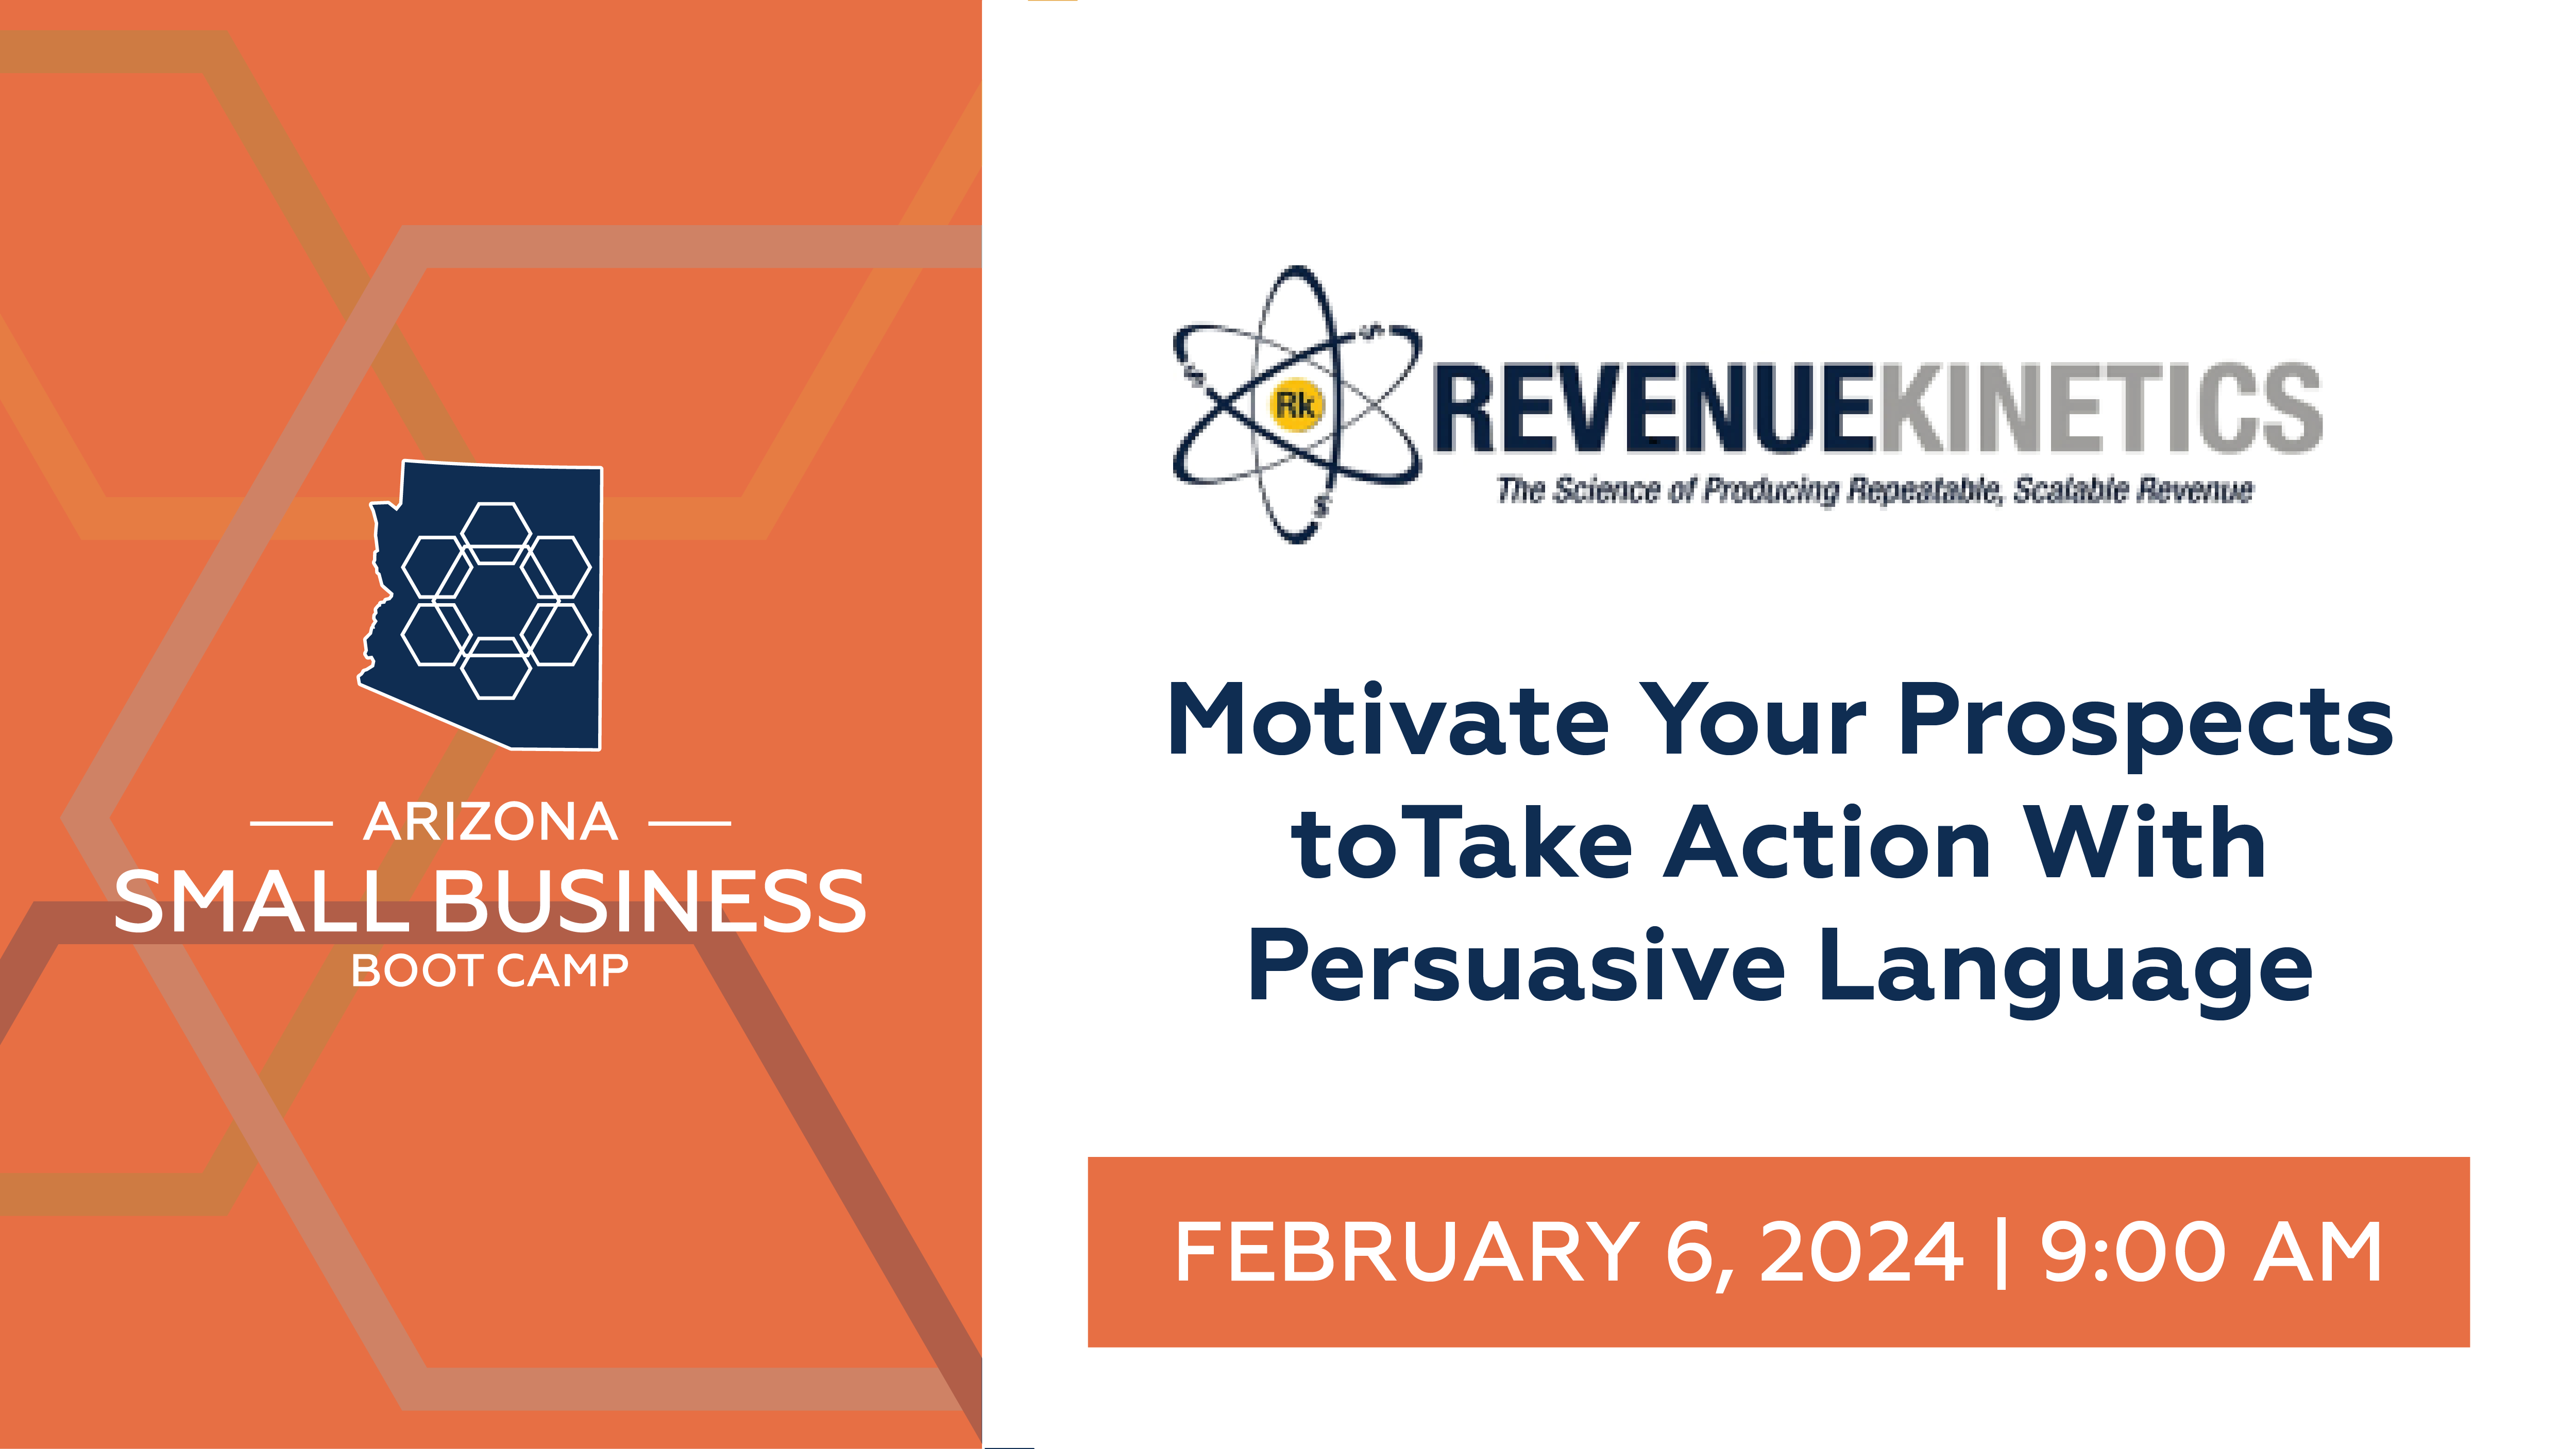 Motivate Your Prospects to Take Action With Persuasive Language